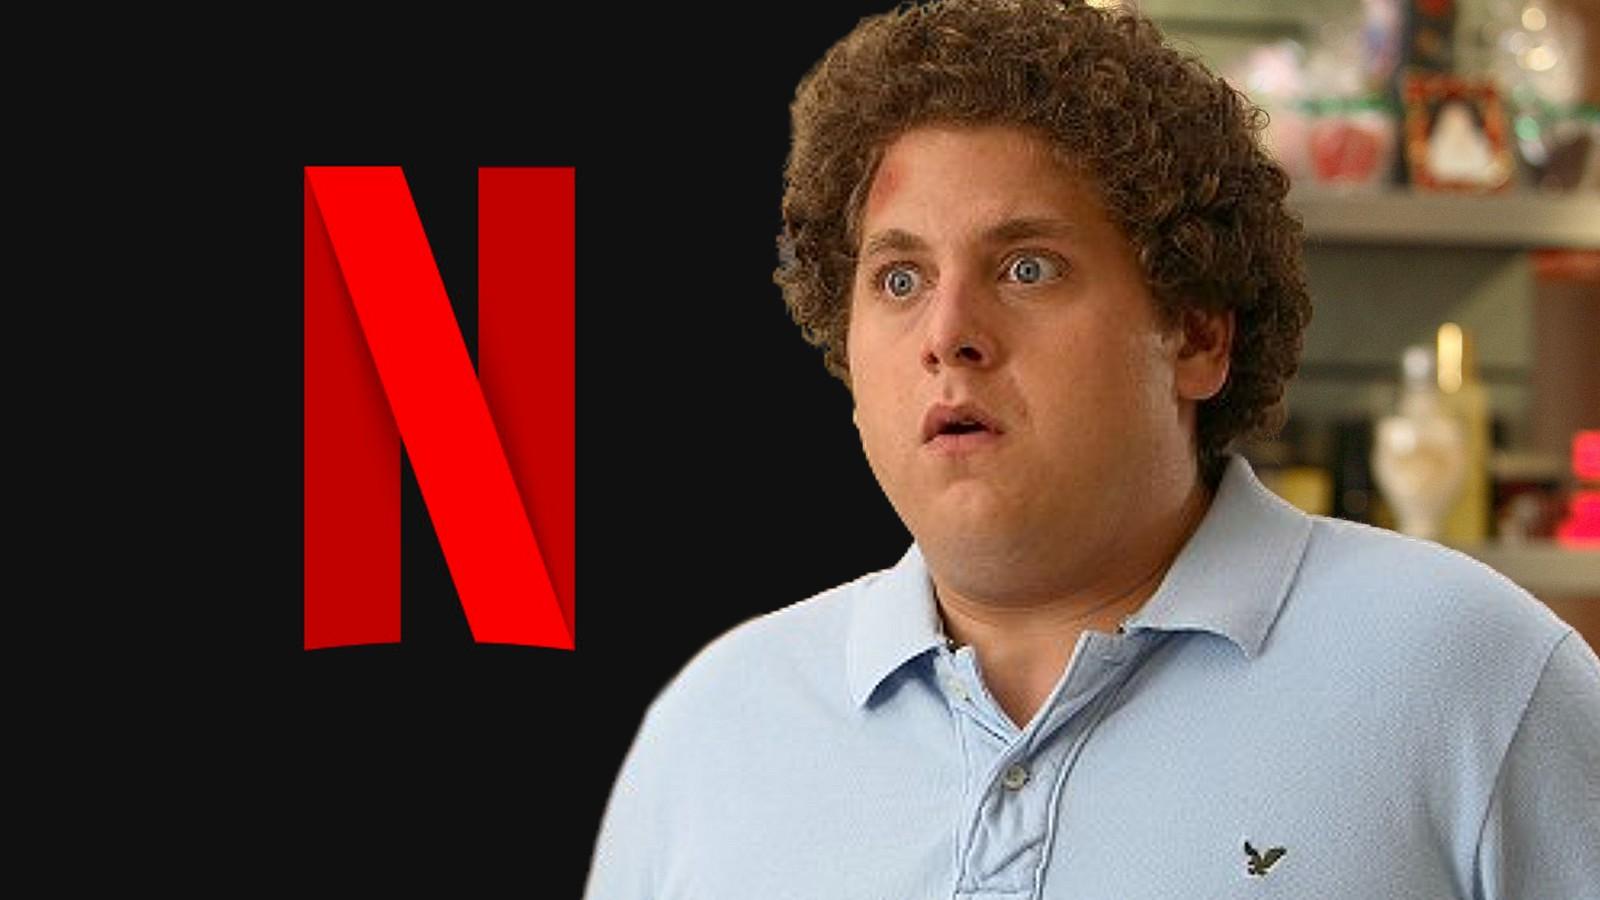 Jonah Hill in Superbad and the Netflix logo